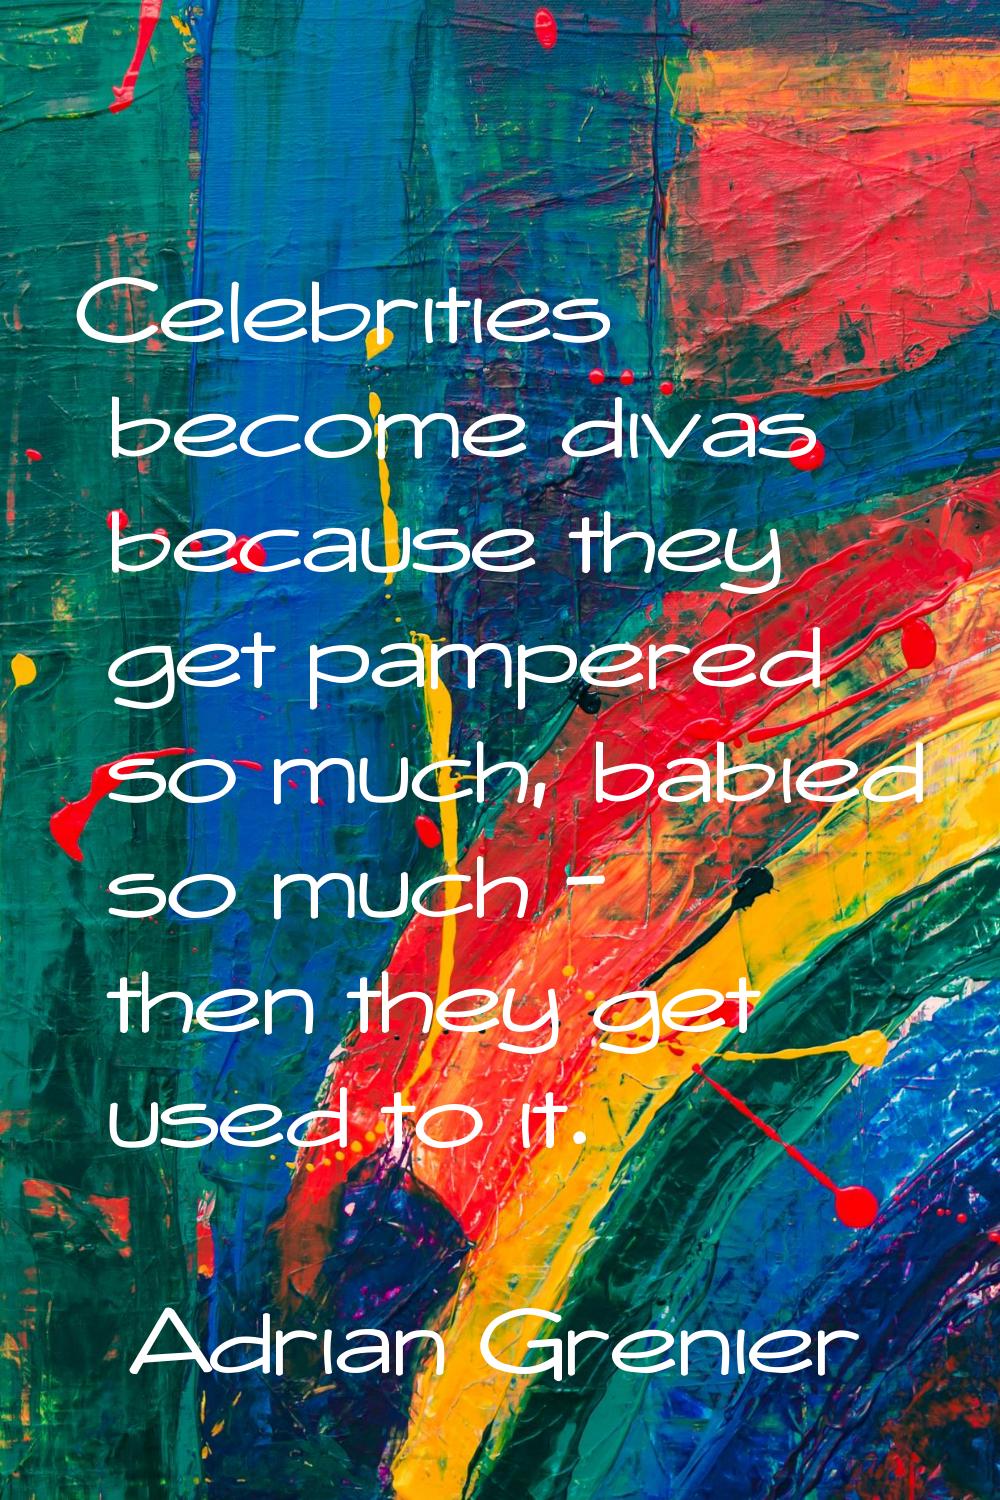 Celebrities become divas because they get pampered so much, babied so much - then they get used to 